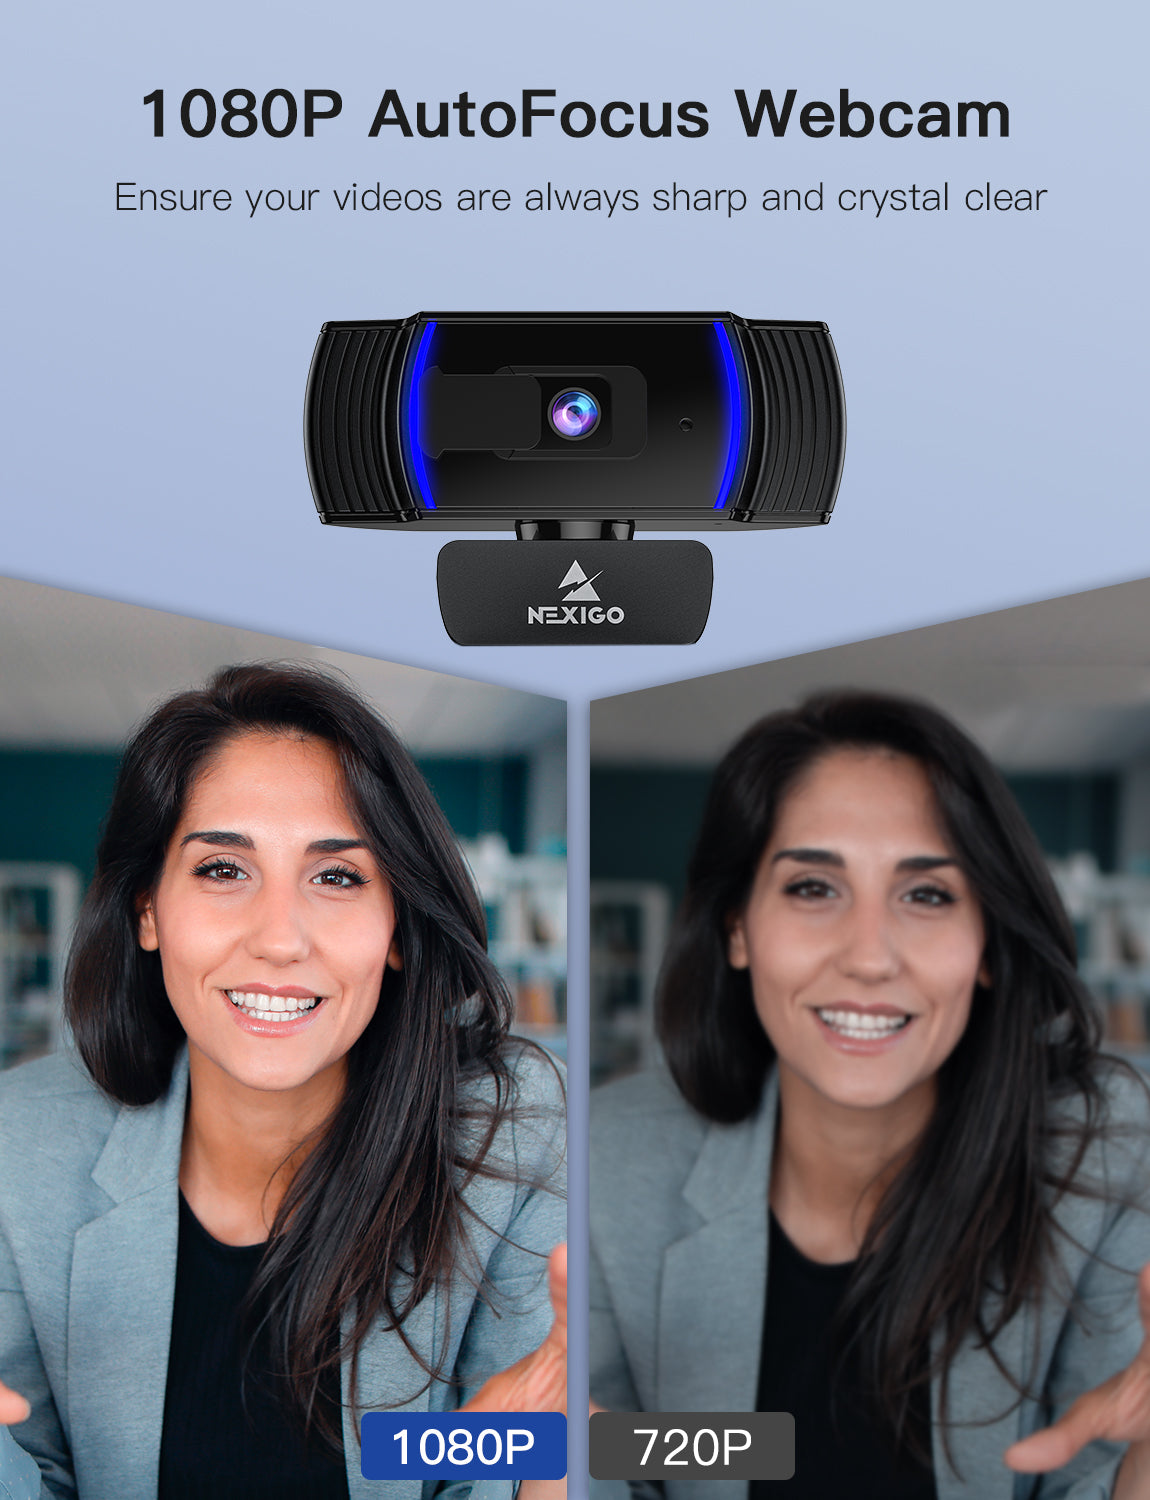 Webcam is 1080p resolution with auto-focus function, showing a quality comparison with 720p.